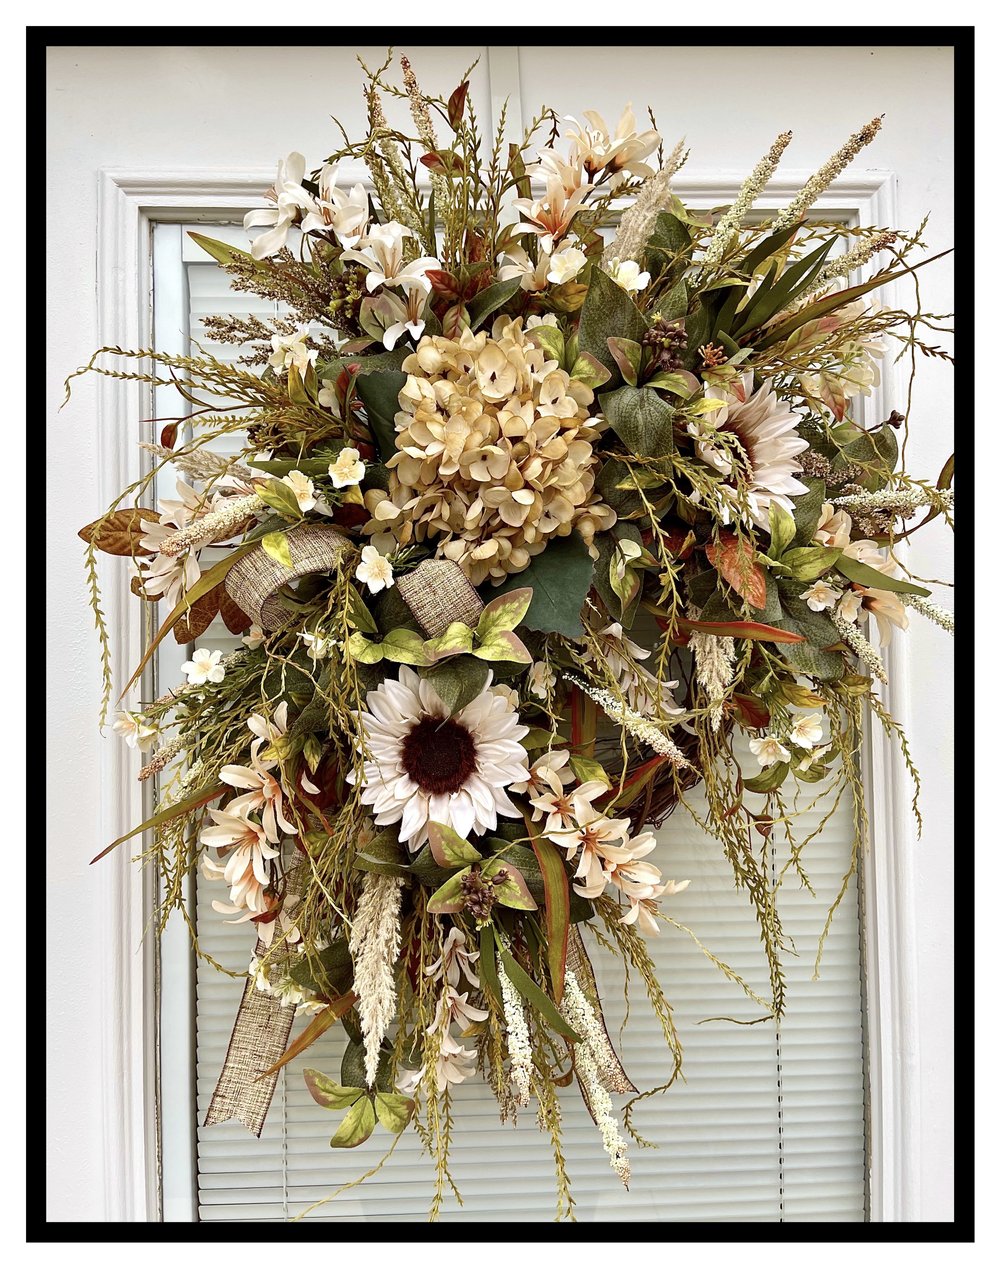 Updating a Fall Wreath Using Floral Picks - The Everyday Home